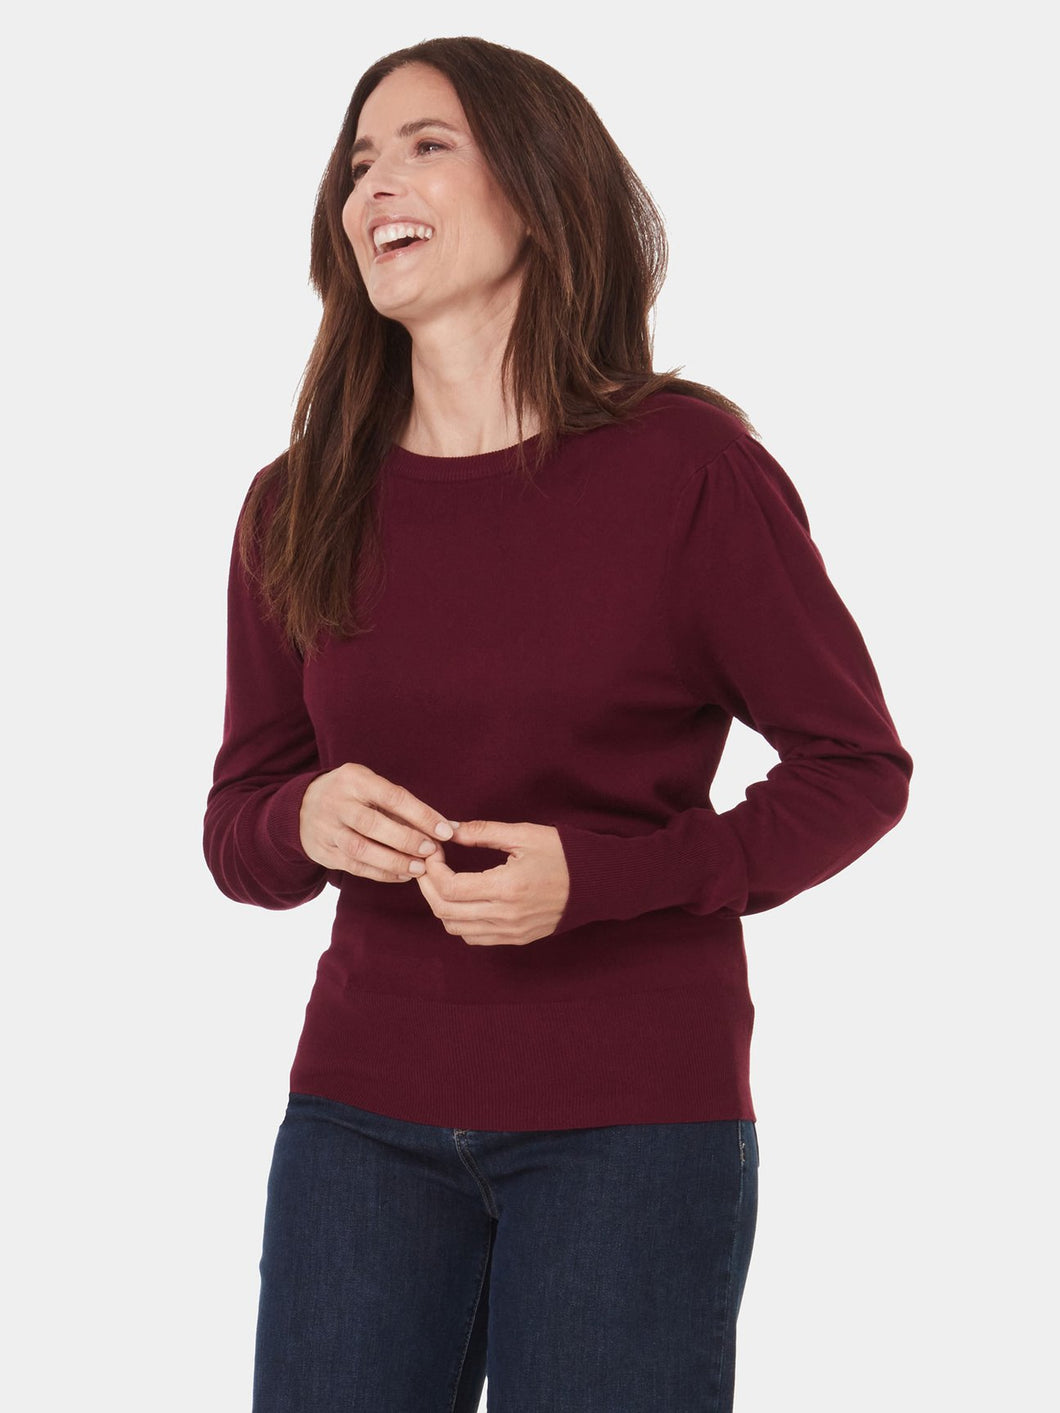 Lois Jane Long Sleeve Crew Neck Sweater Pullover